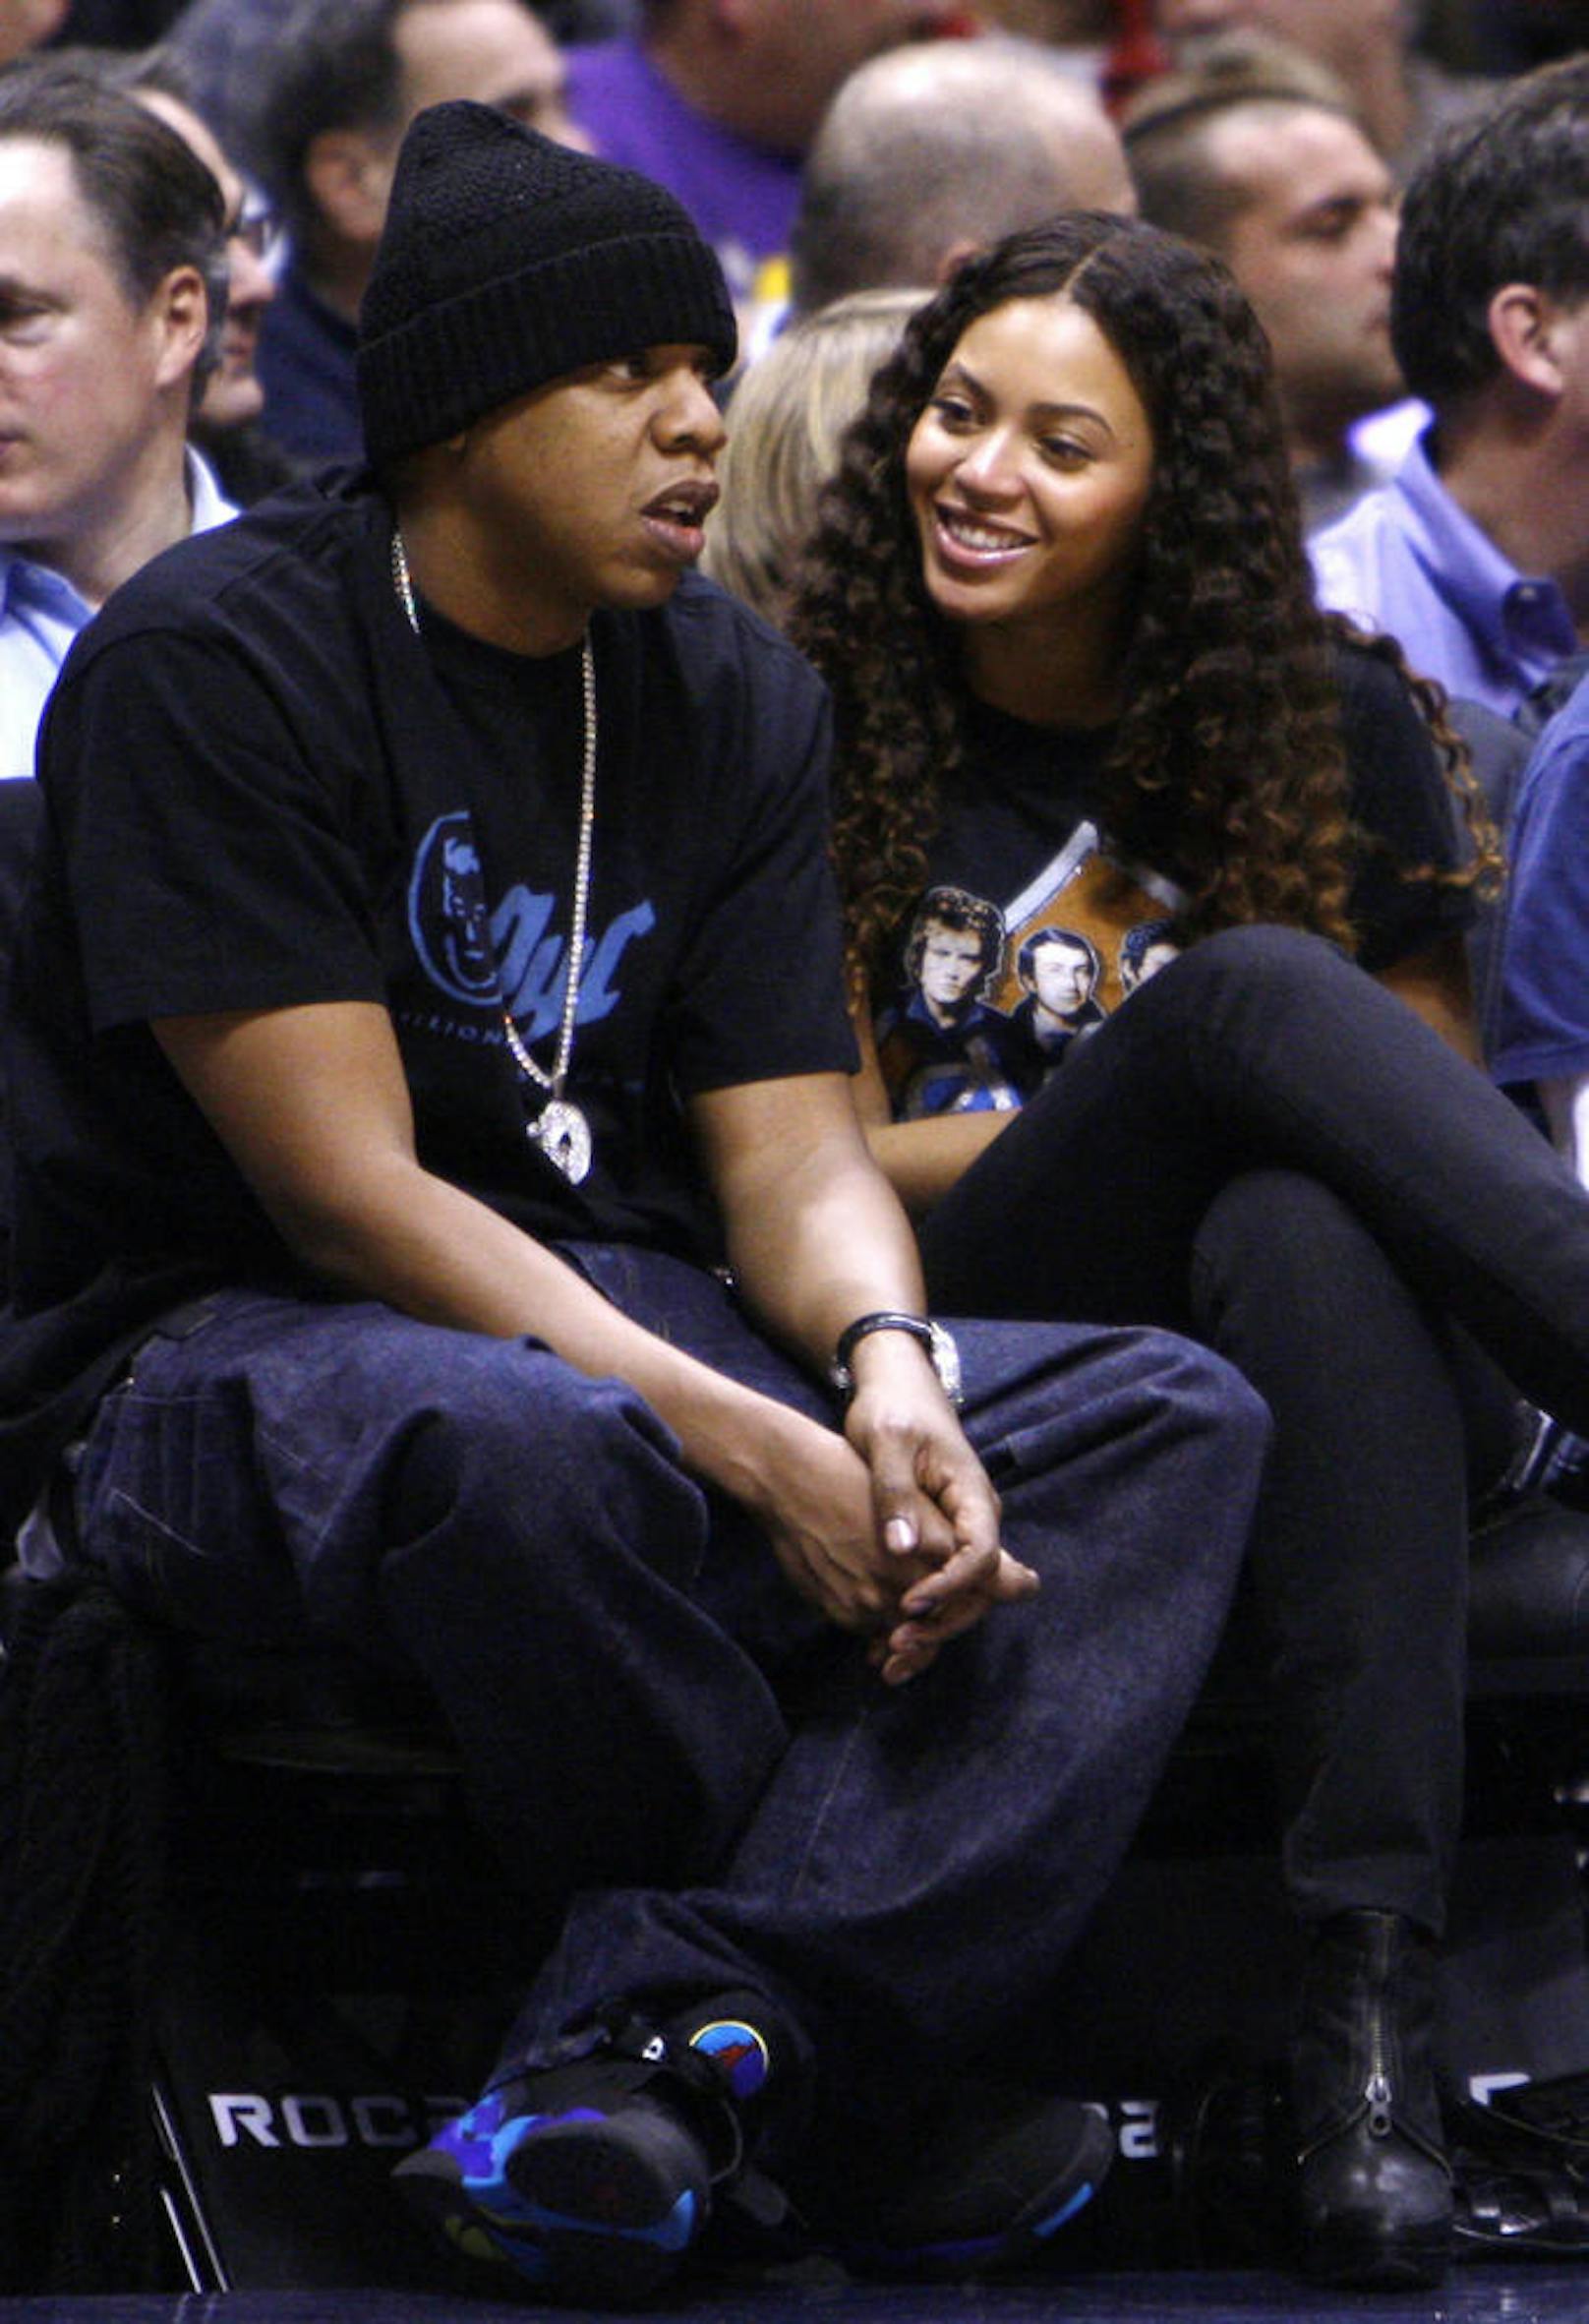 Beyonce Knowles und Jay-Z bei einem NBA Basketball-Spiel in East Rutherford, New Jersey, 2007.